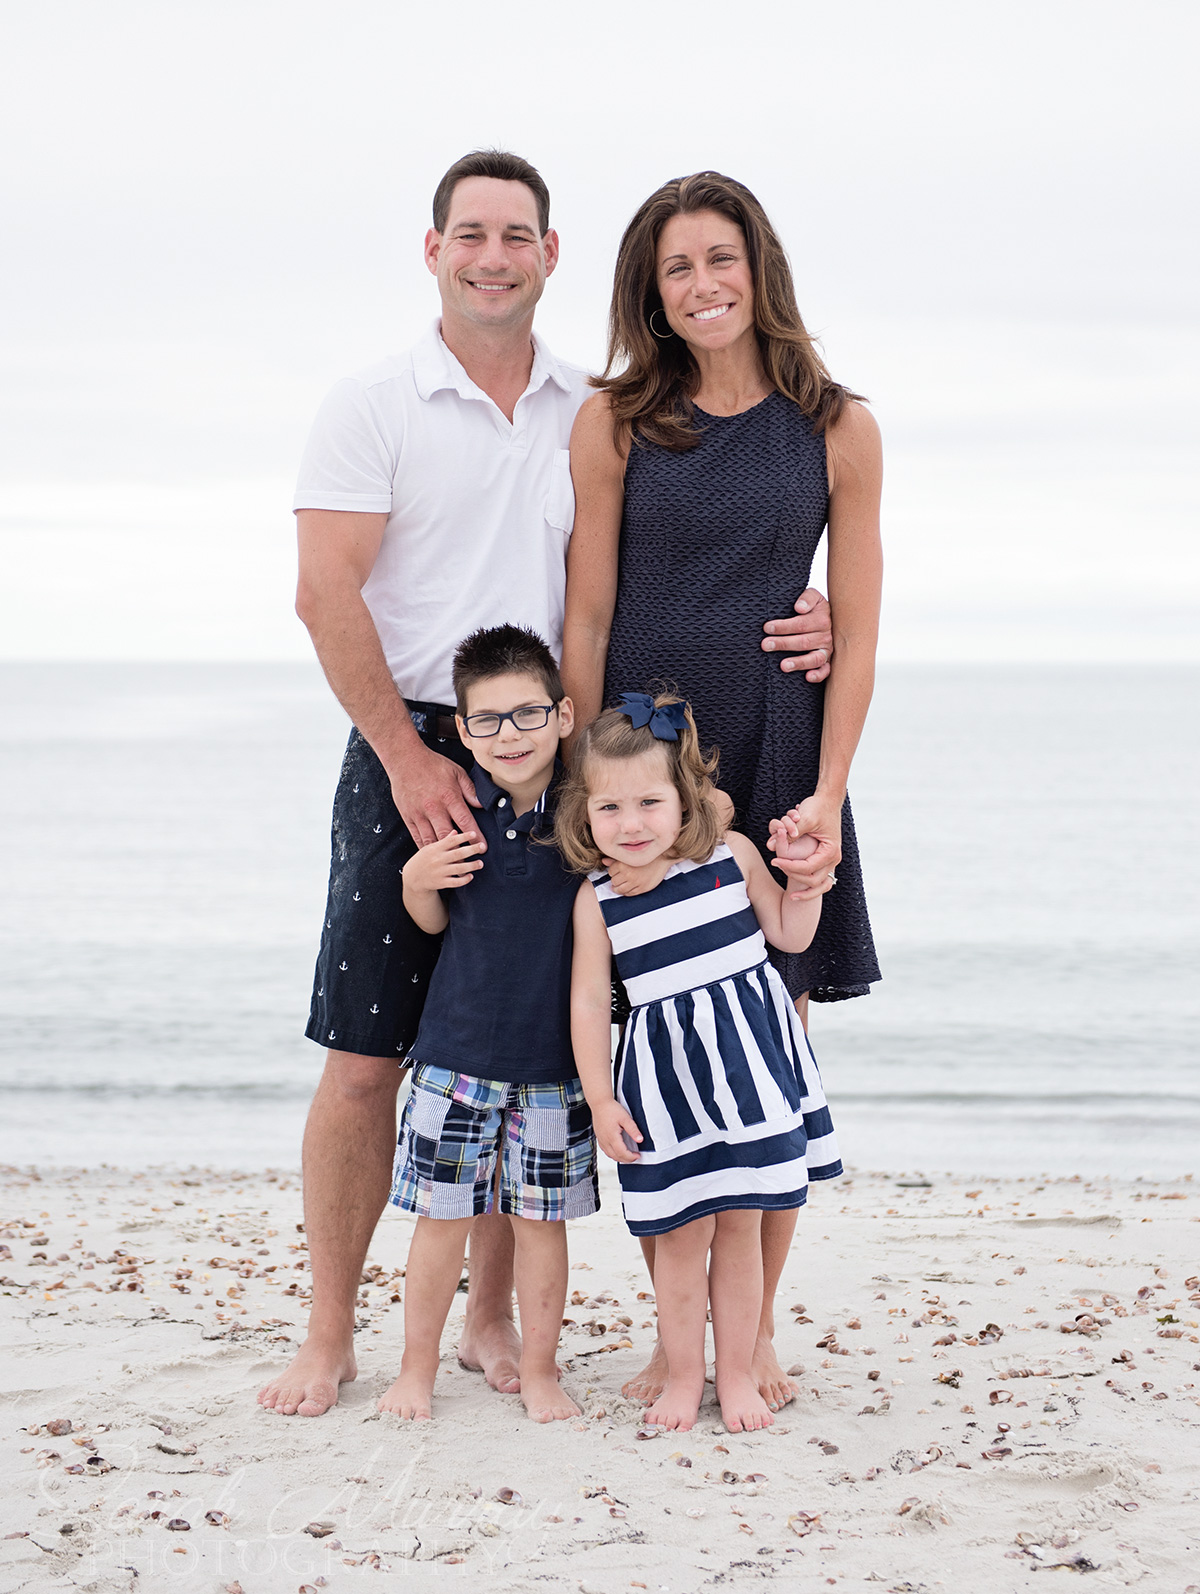 Dowses Beach Cape Cod Family Photo Session in Osterville, Massachusetts - Sarah Murray Photography